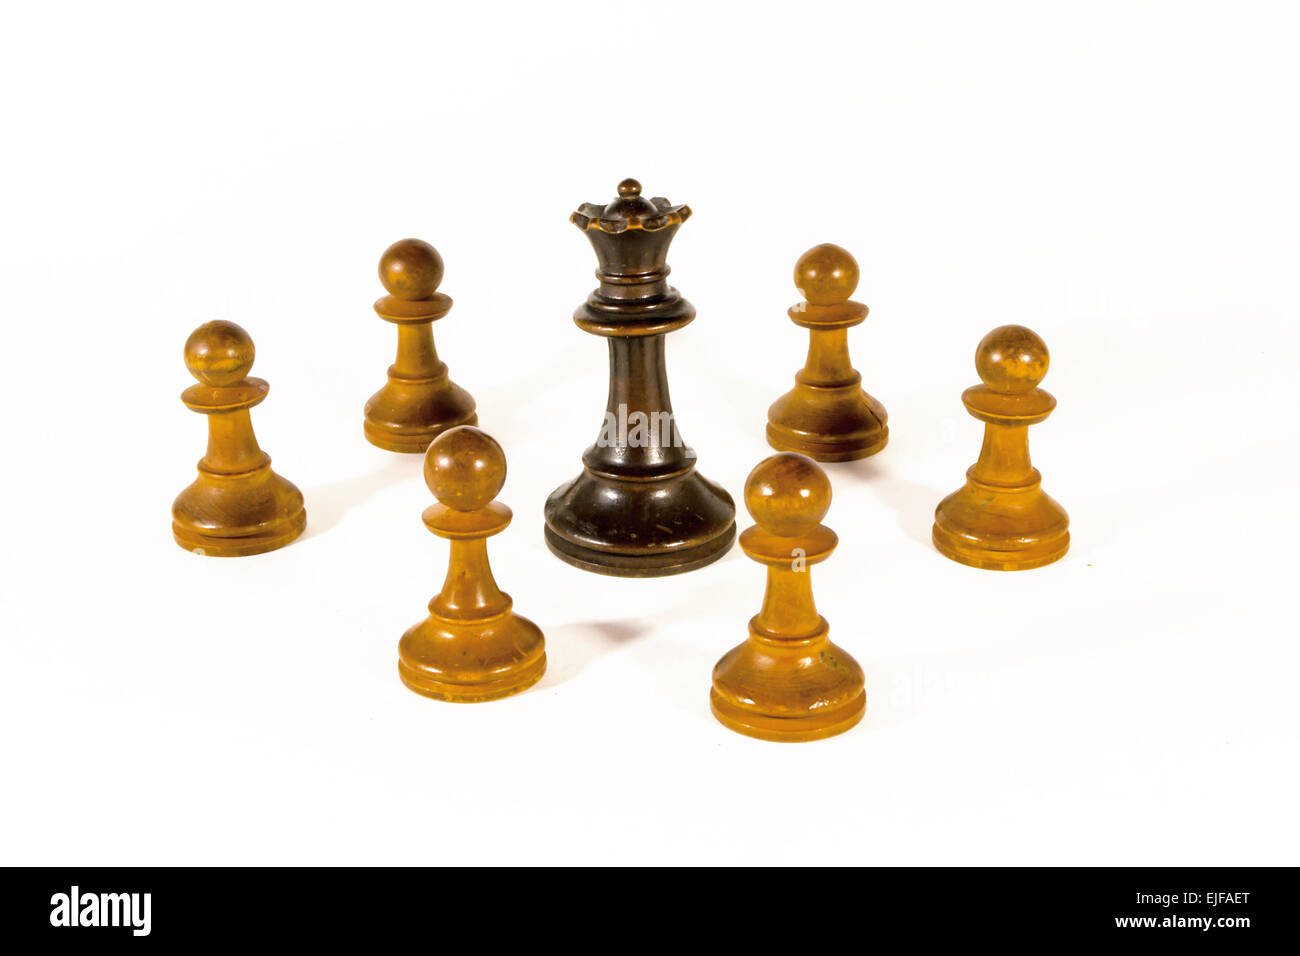 A chessboard of order six with six black rooks placed in such a way